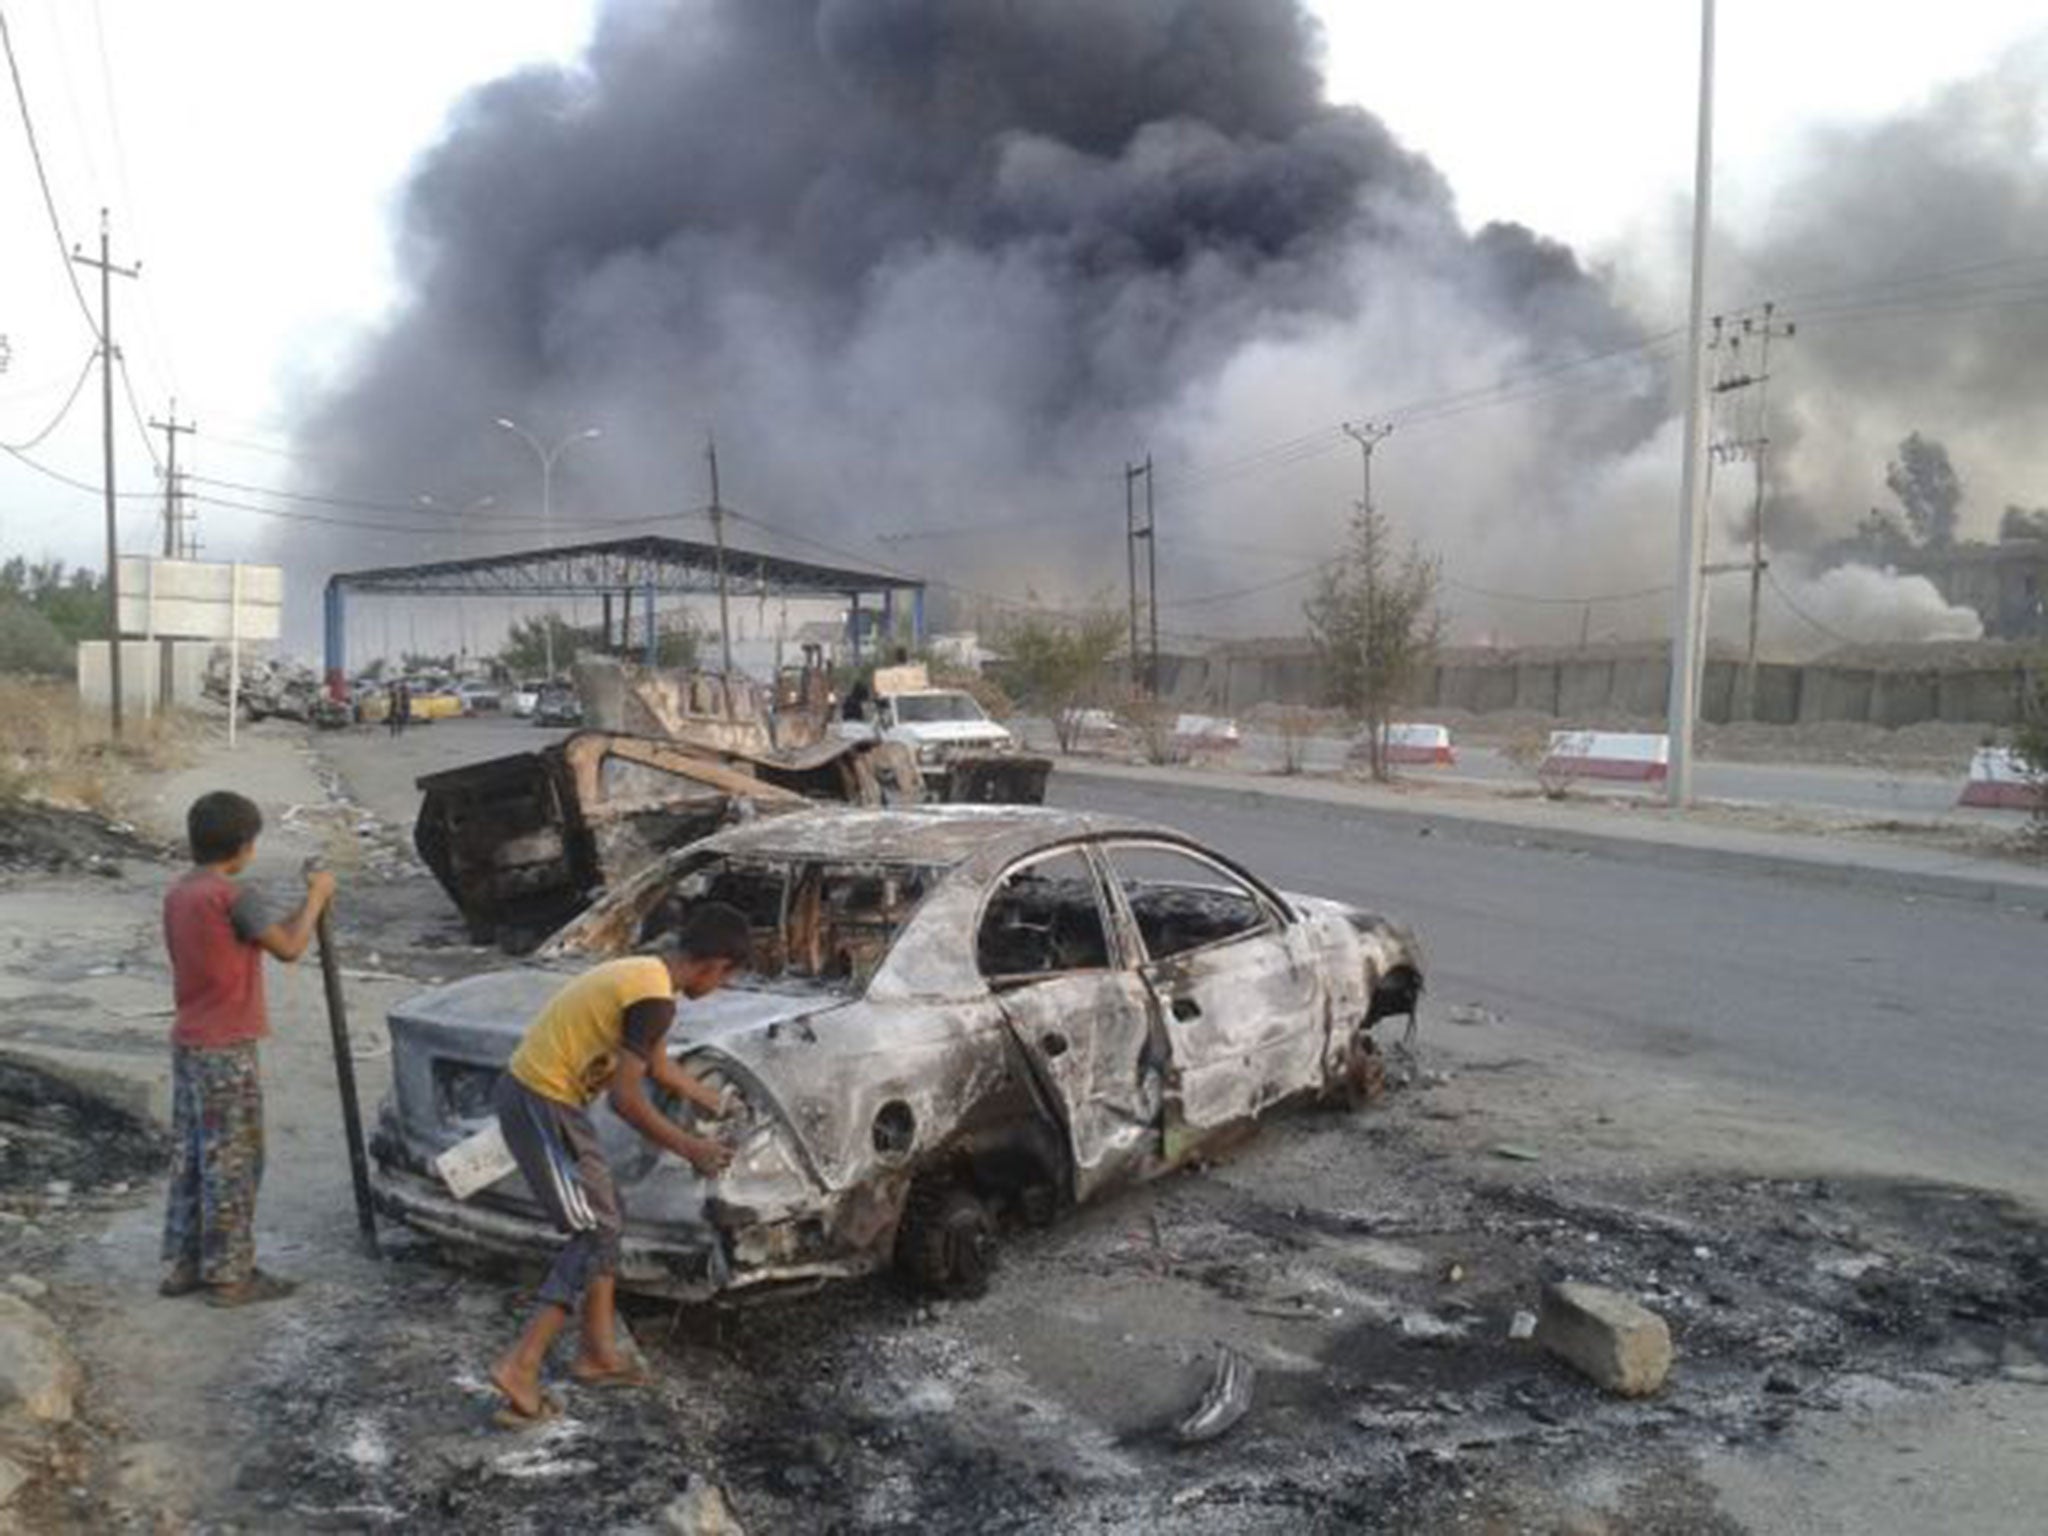 Scenes of destruction in Mosul soon after Isis seized power in June 2014